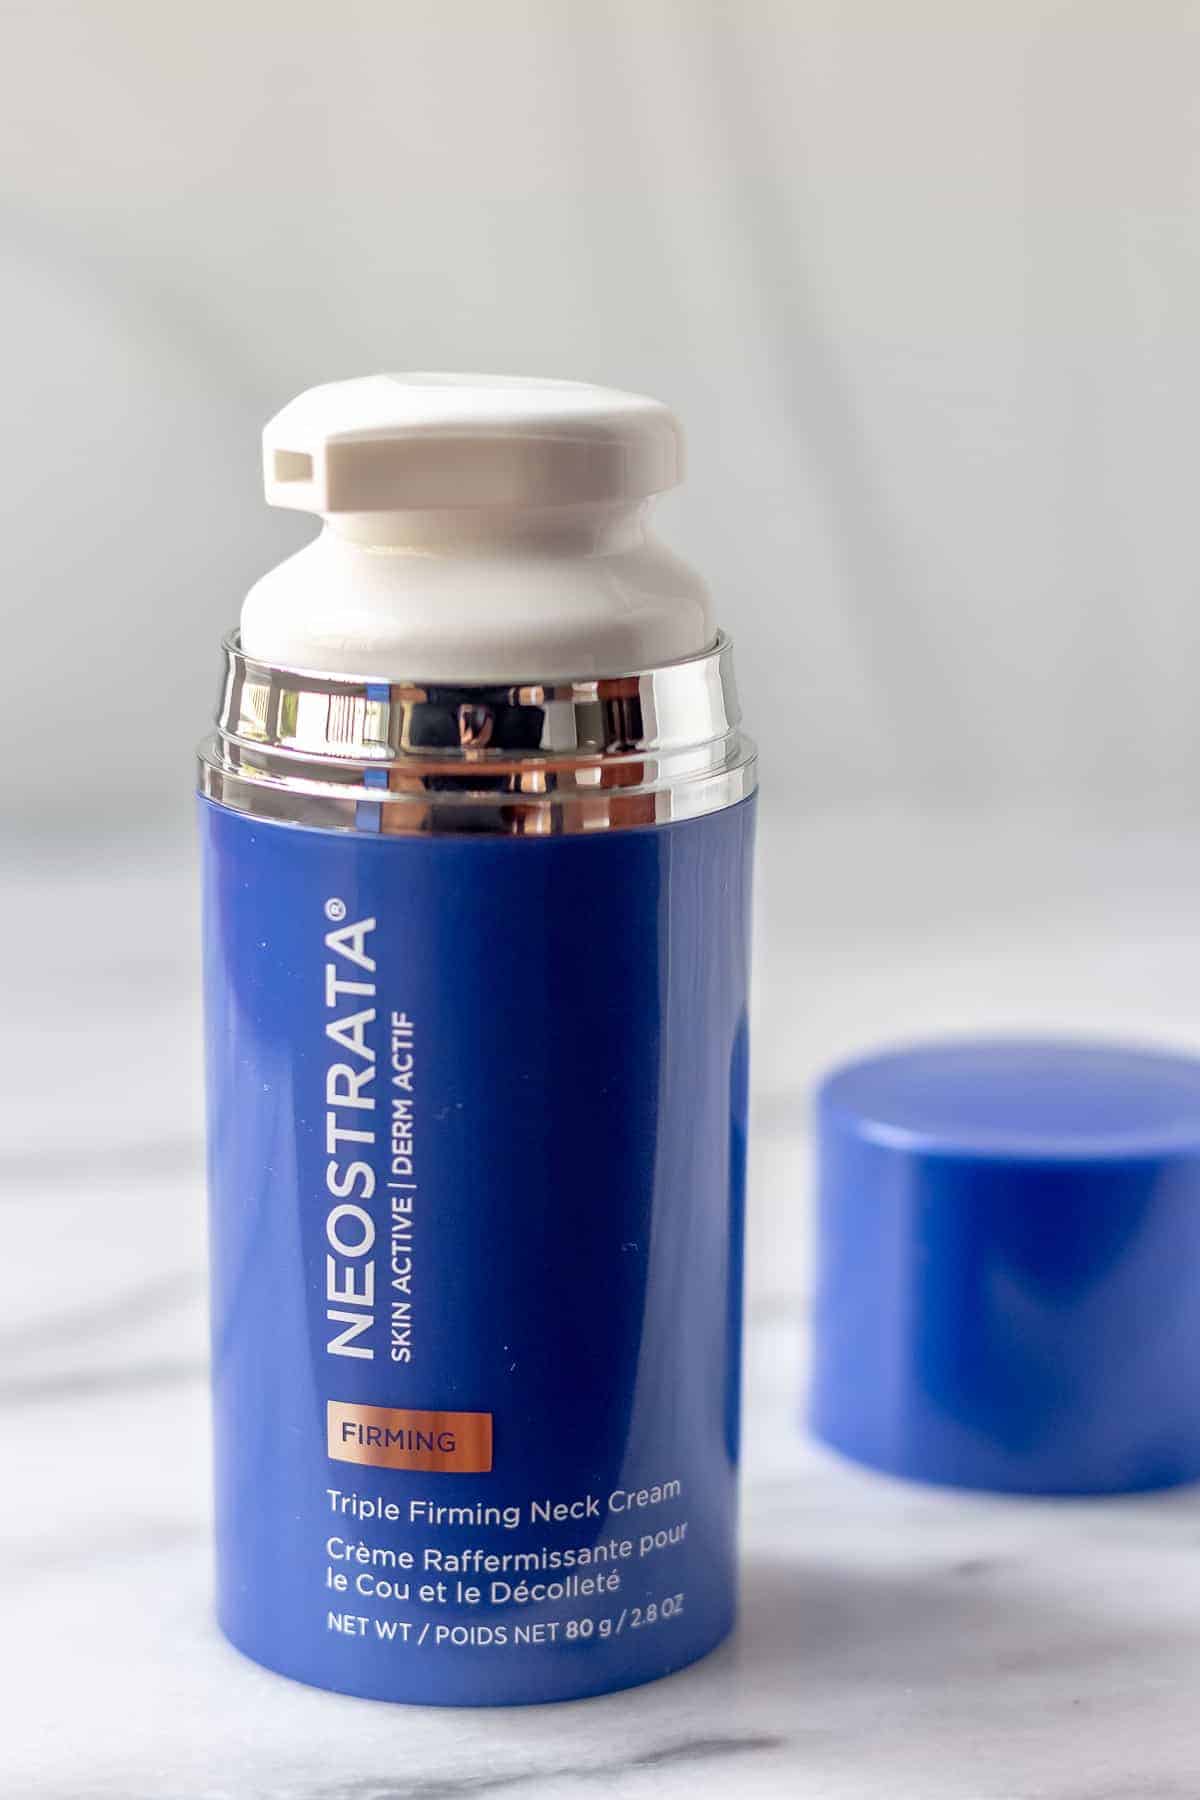 Neostrata Triple Firming neck cream bottle with the cap off